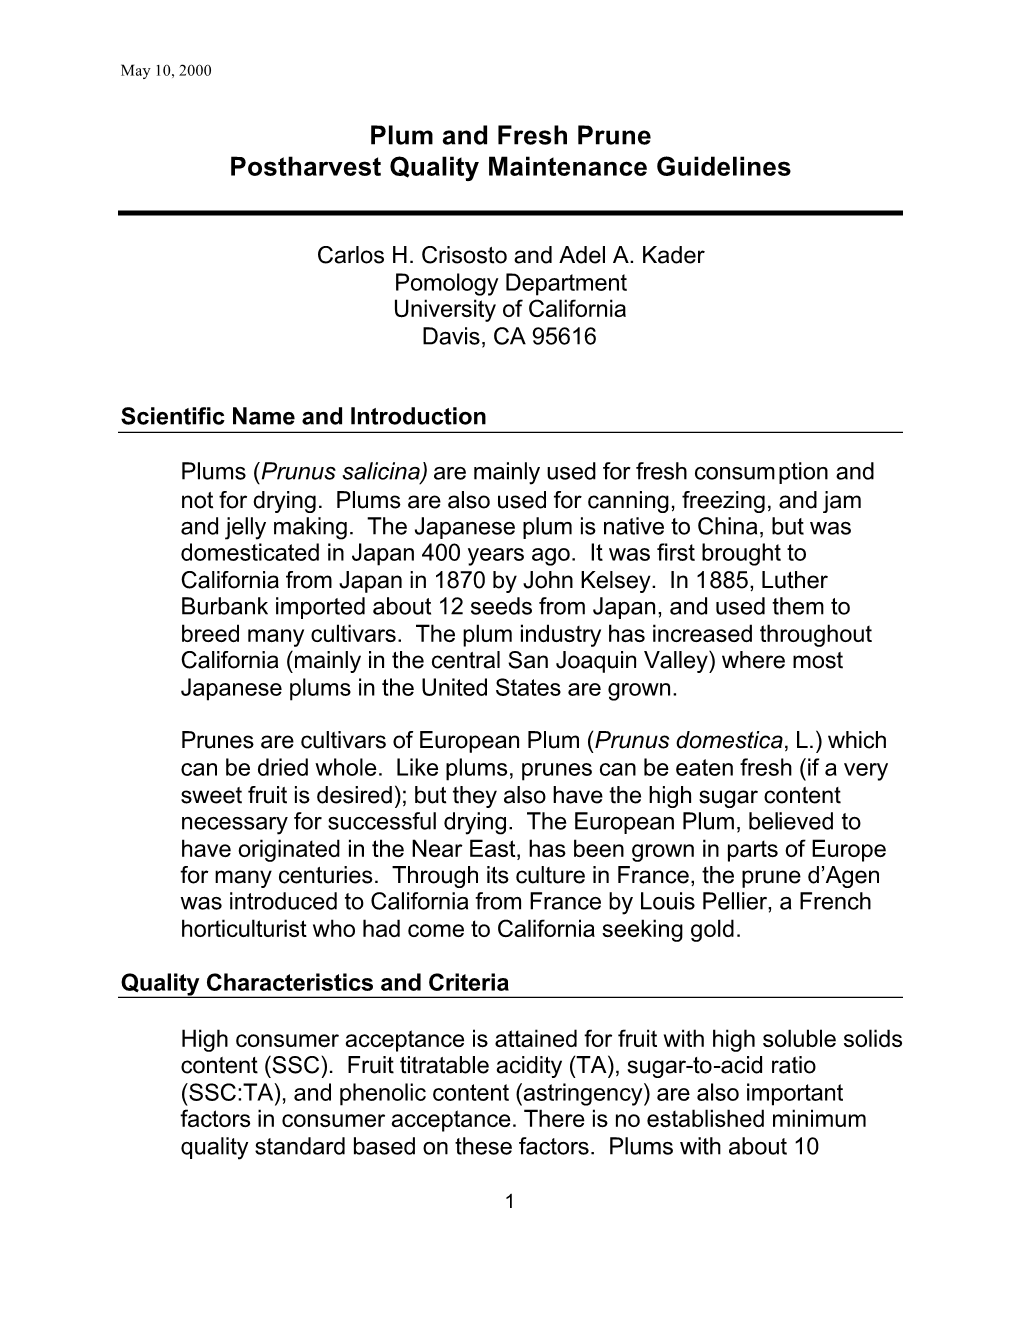 Plum and Fresh Prune Postharvest Quality Maintenance Guidelines